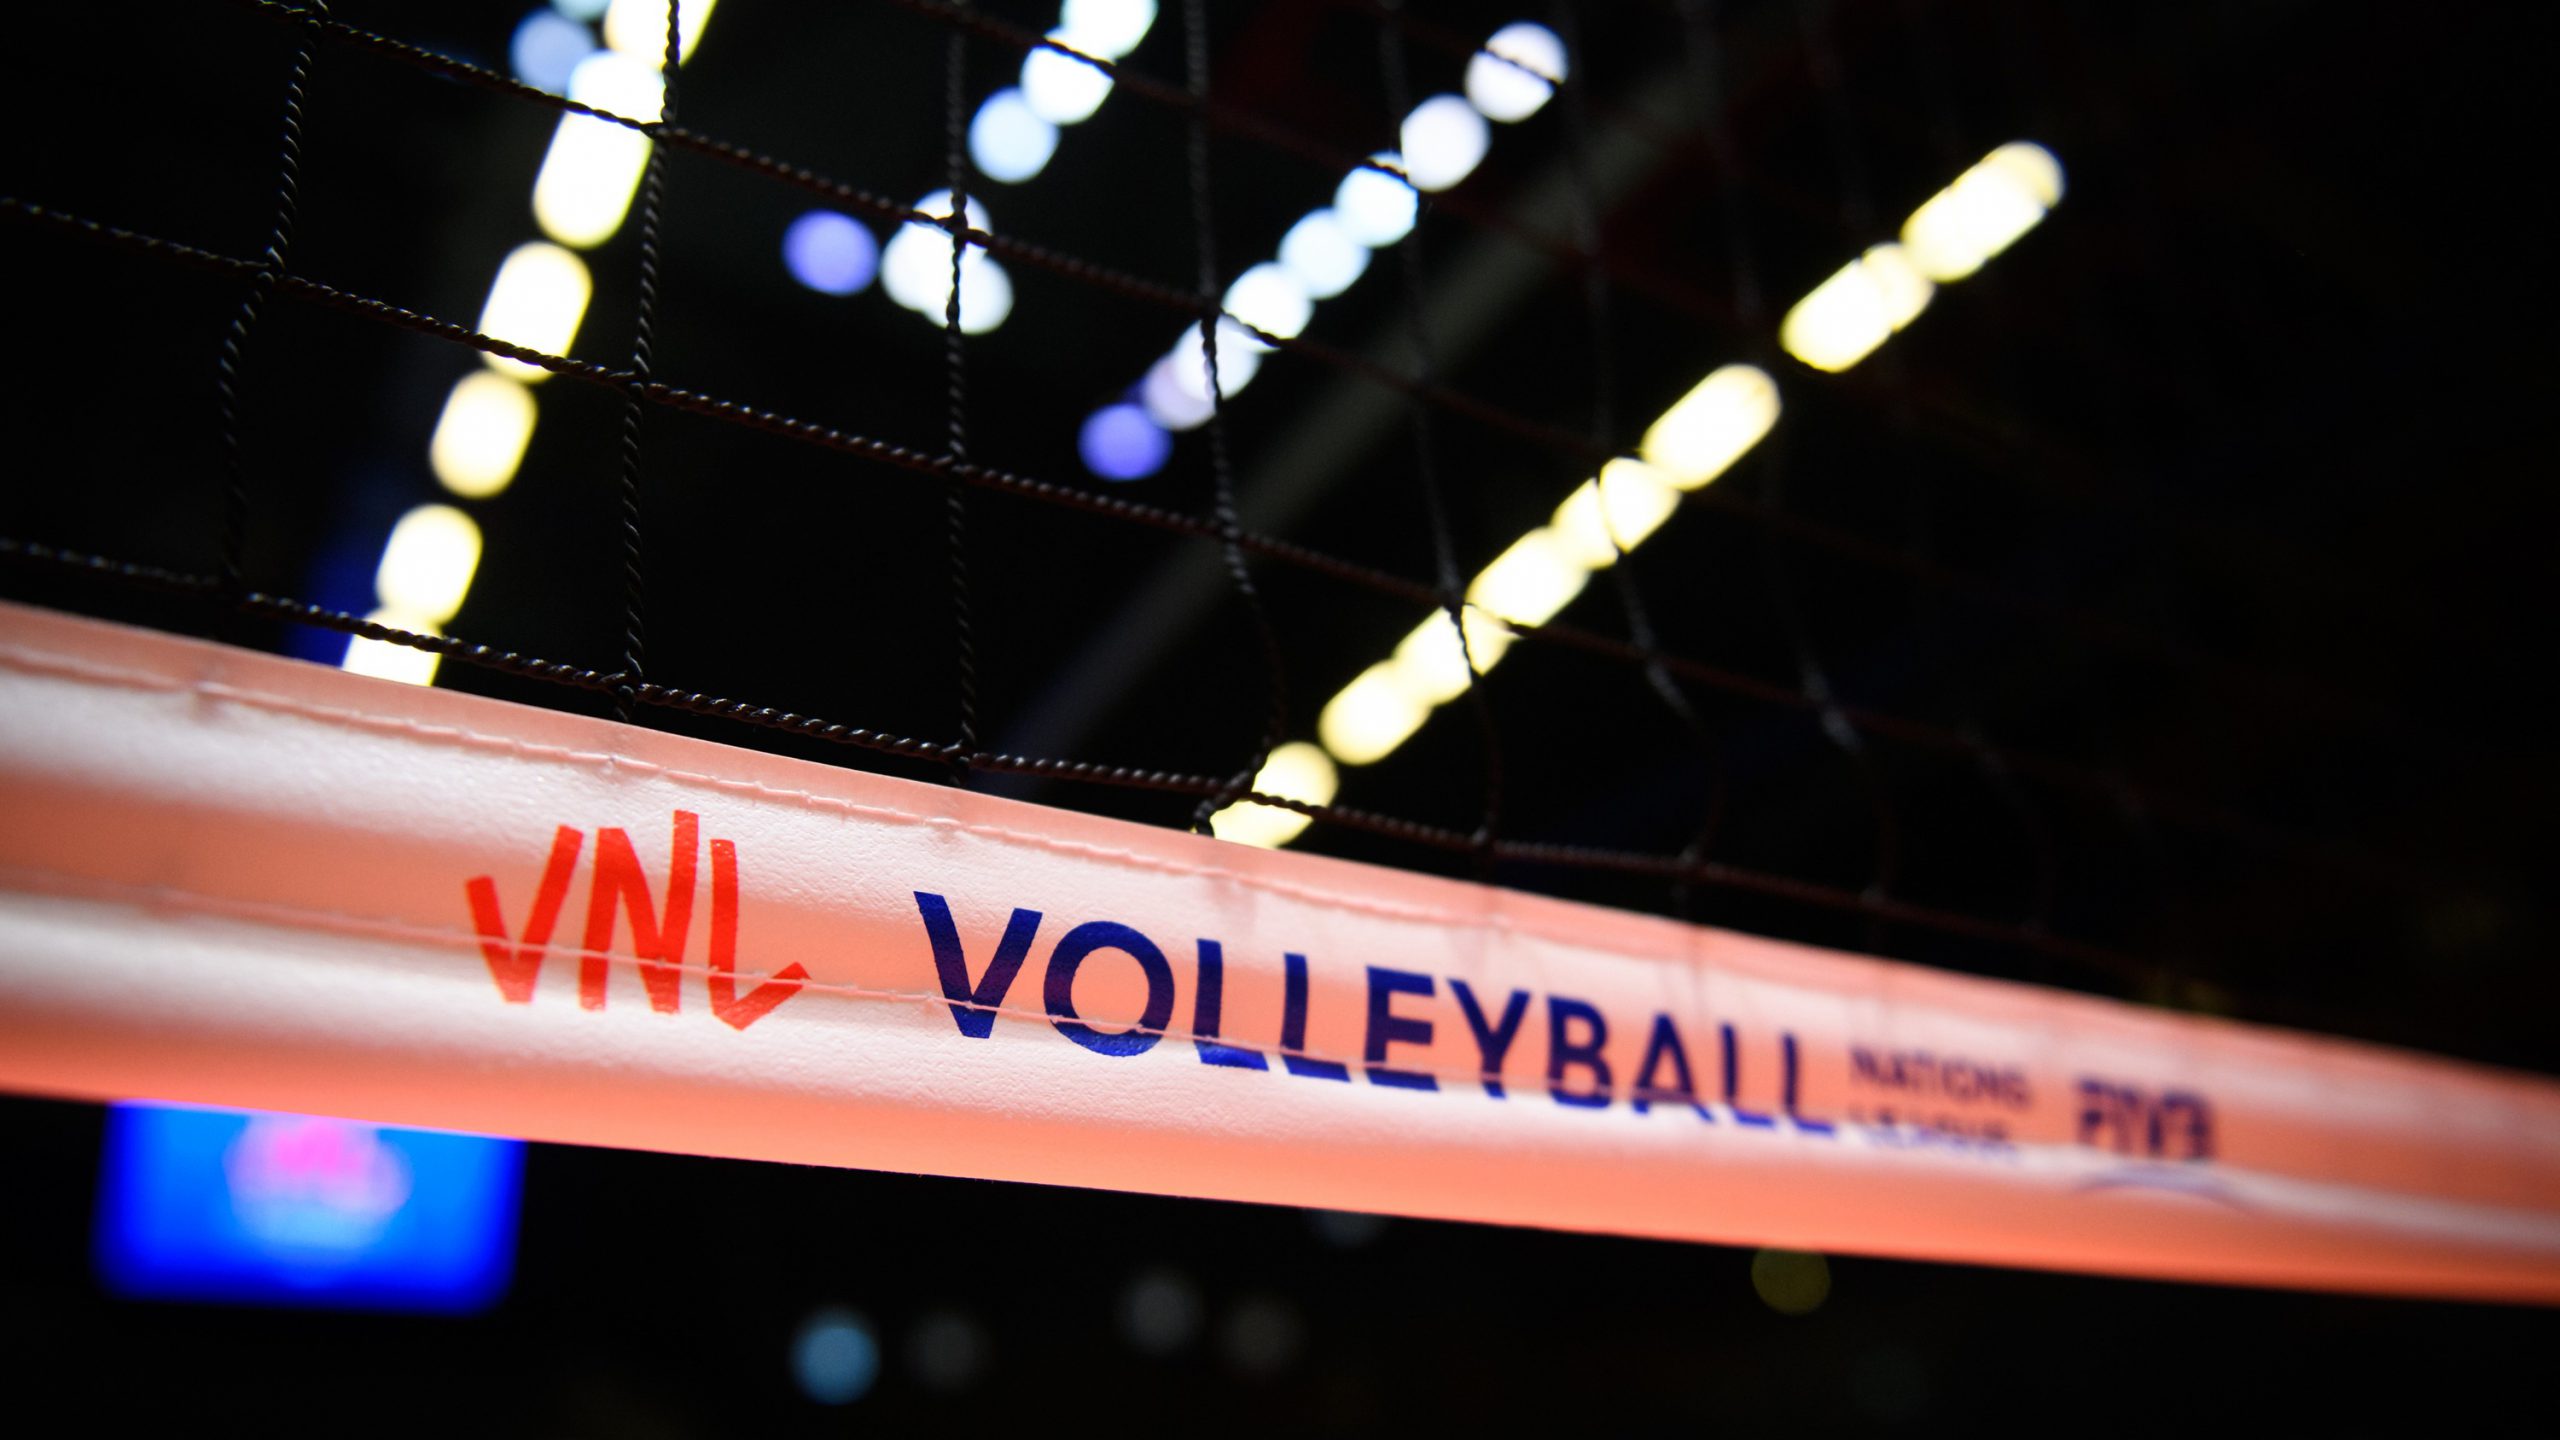 ITALY TO HOST VNL 2021 IN SECURE BUBBLE